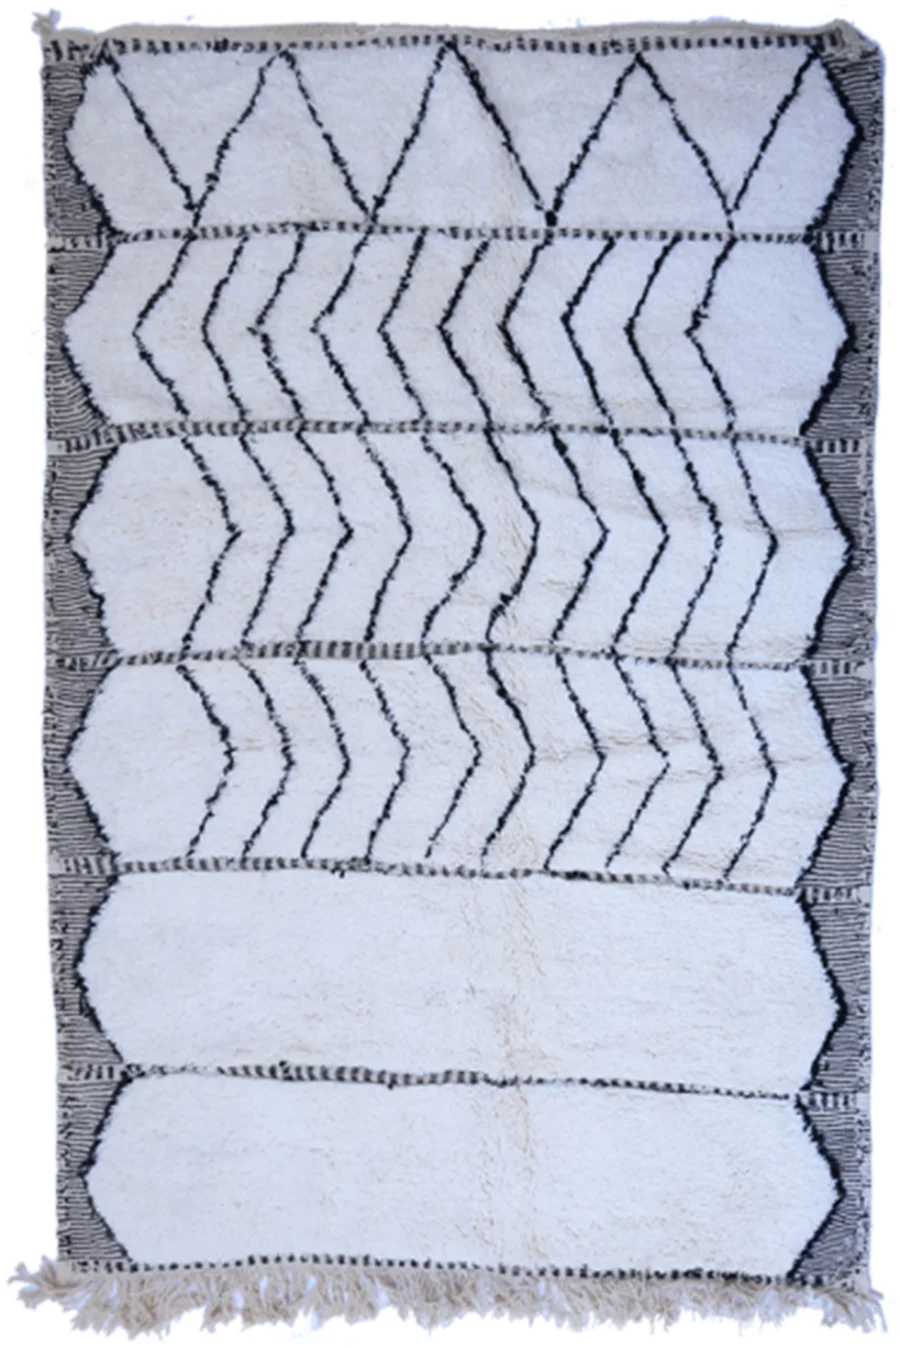 "Handcrafted Moroccan Beni Ourain wool rug with elegant monochrome stripes"